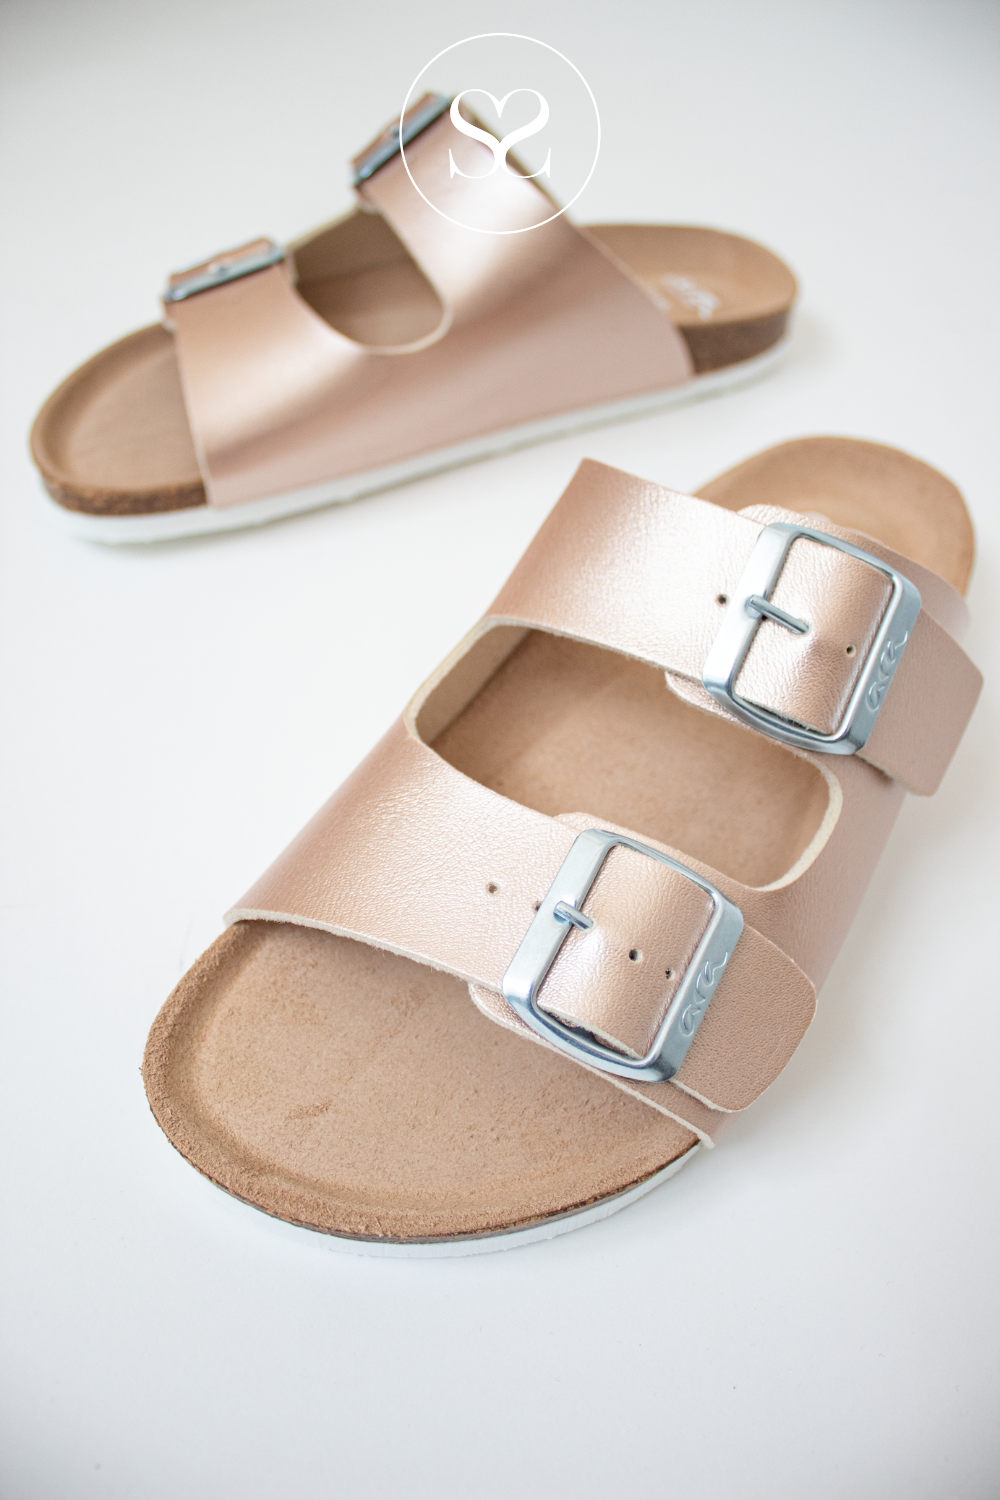 COMFORTABLE LEATHER SANDALS FROM ARA IN ROSE GOLD